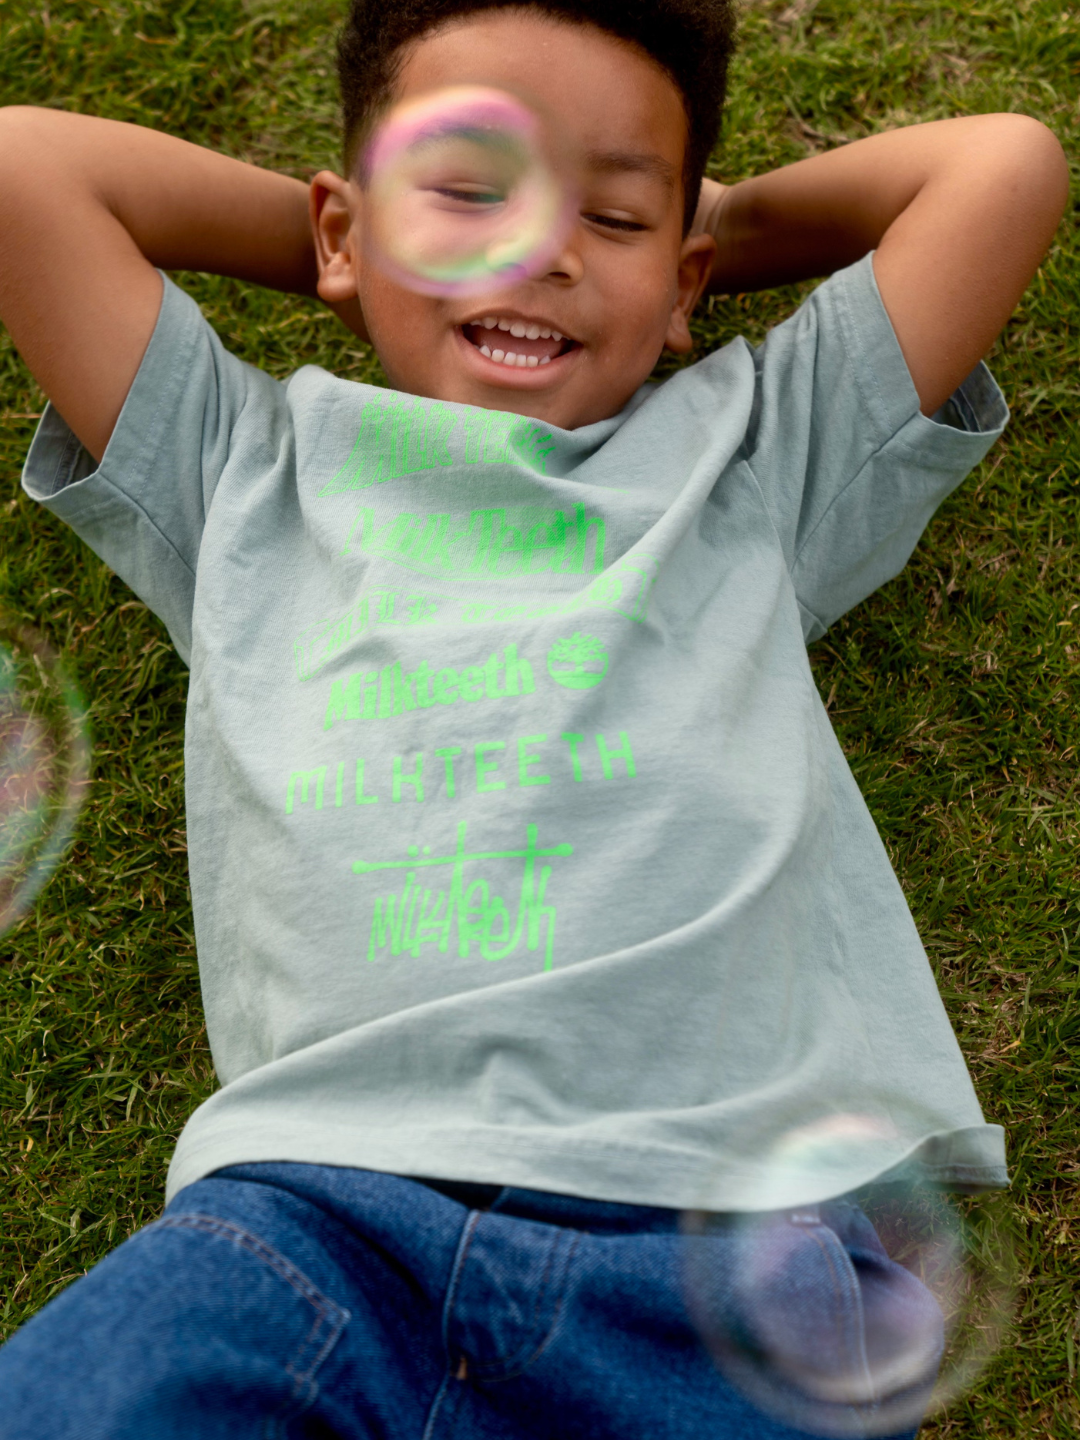 Green | A child wearing a light green t-shirt with Milk Teeth spelled out in various fonts in neon green ink. He wears blue jeans and lies on grass, watching bubbles.